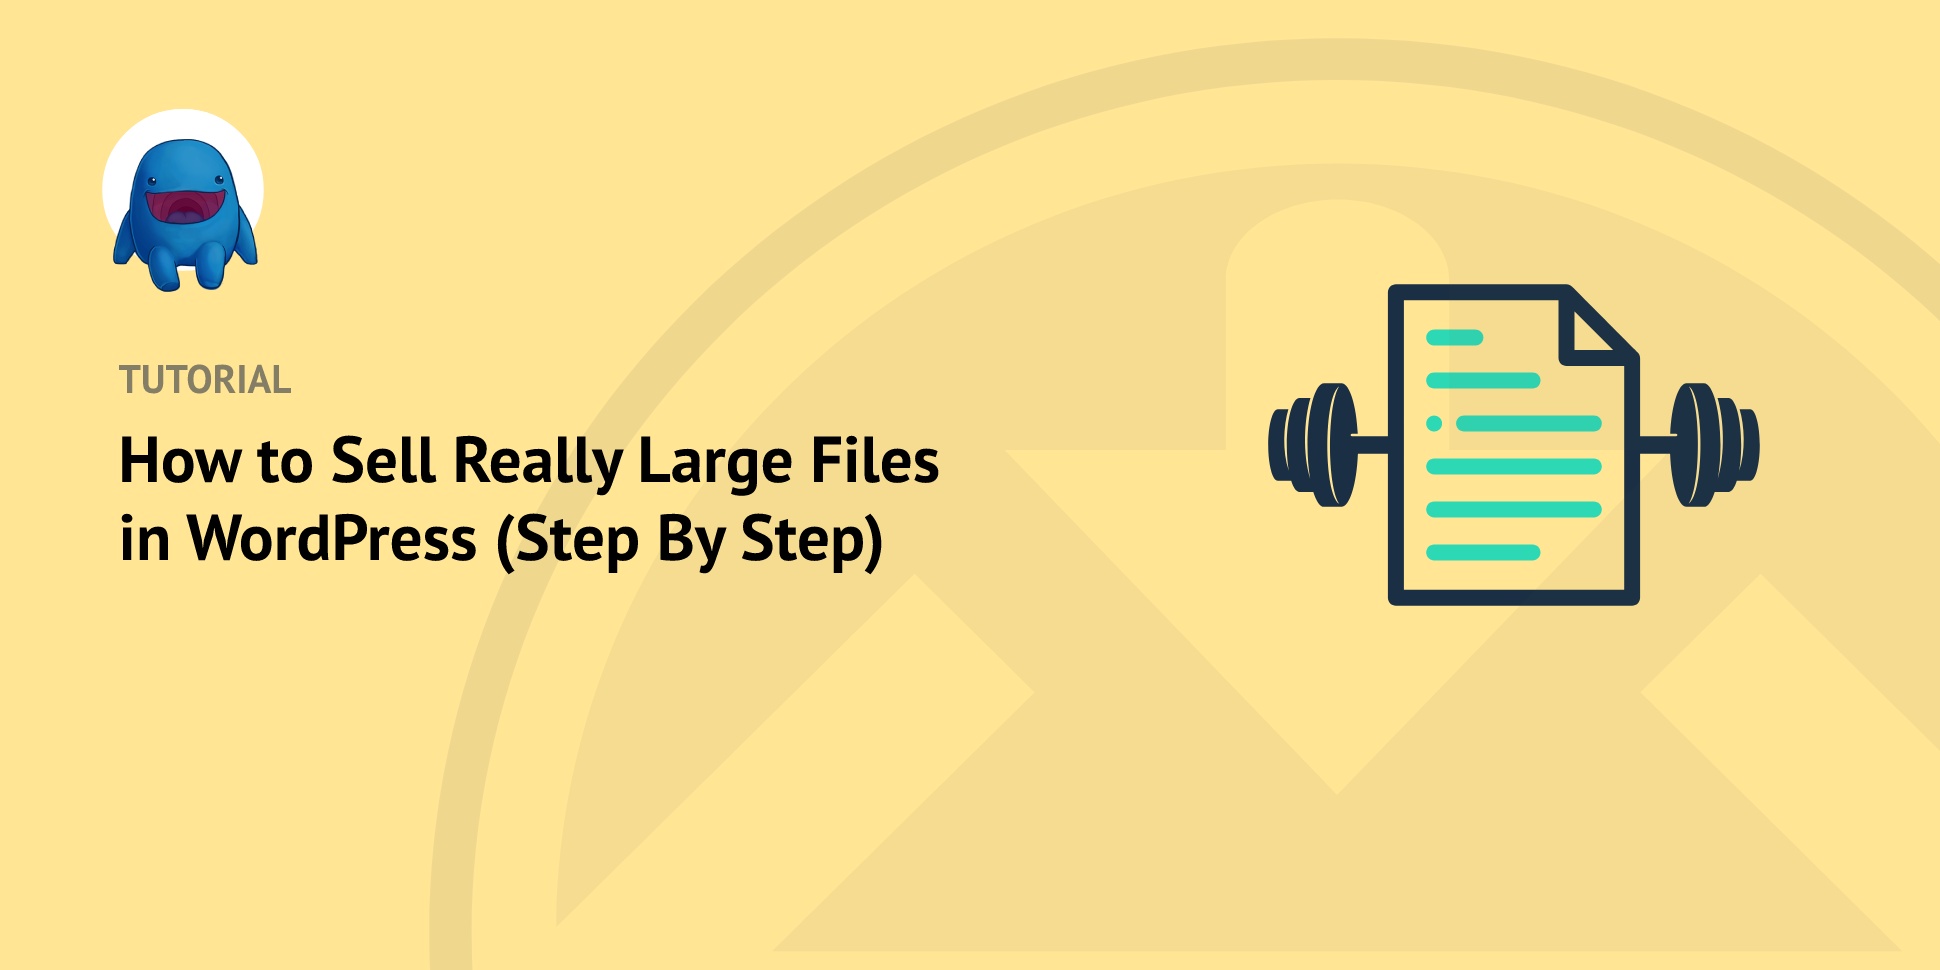 How to Sell Large Files in WordPress (Step By Step)